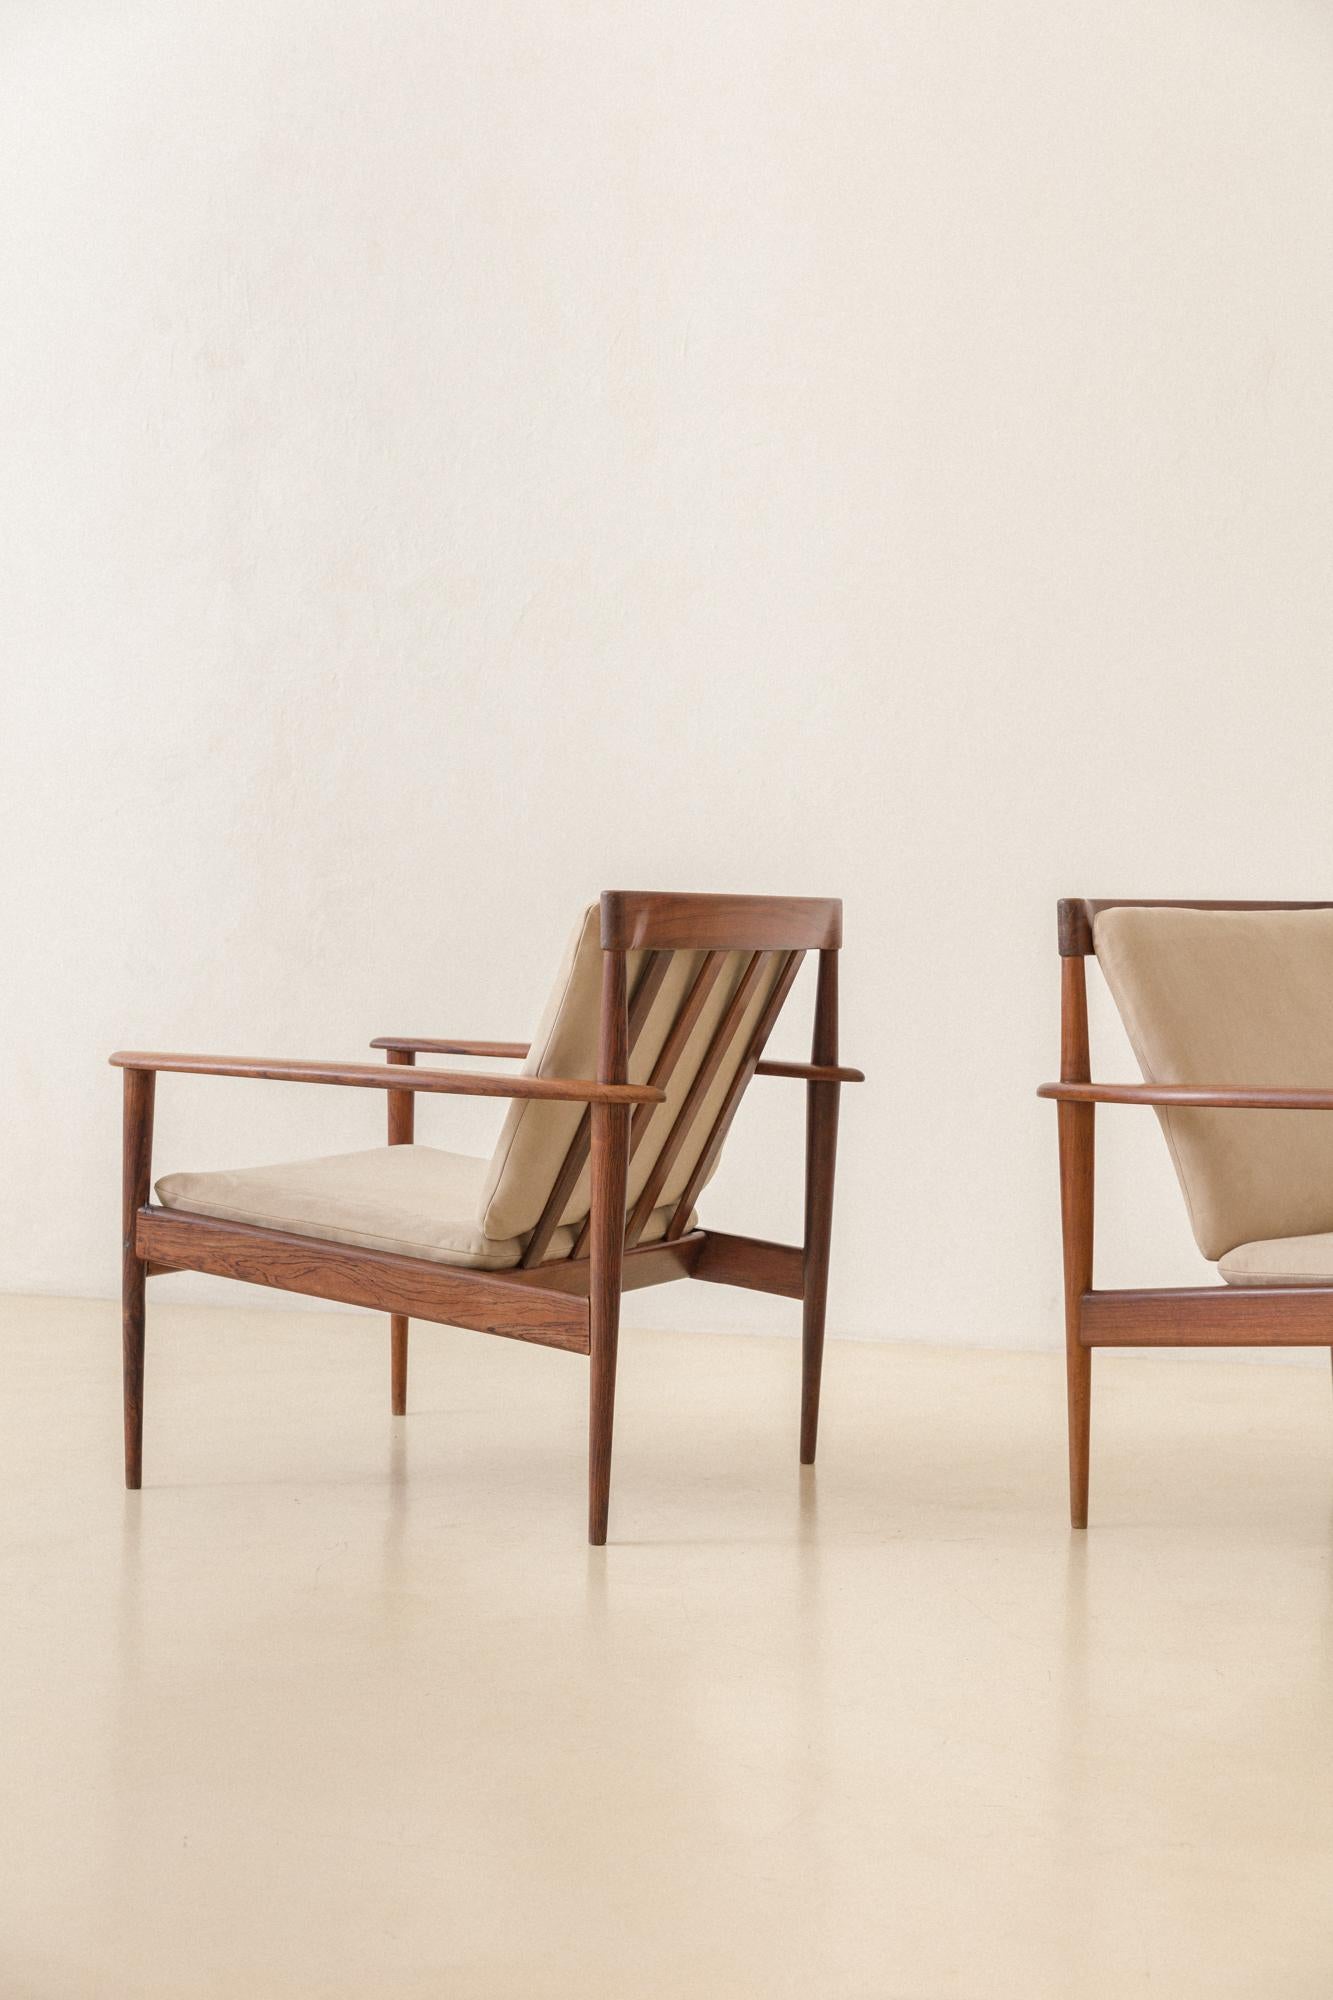 Pair of Armchairs by Grete Jalk/Rino Levi, c. 1951, Brazilian Midcentury Design For Sale 1